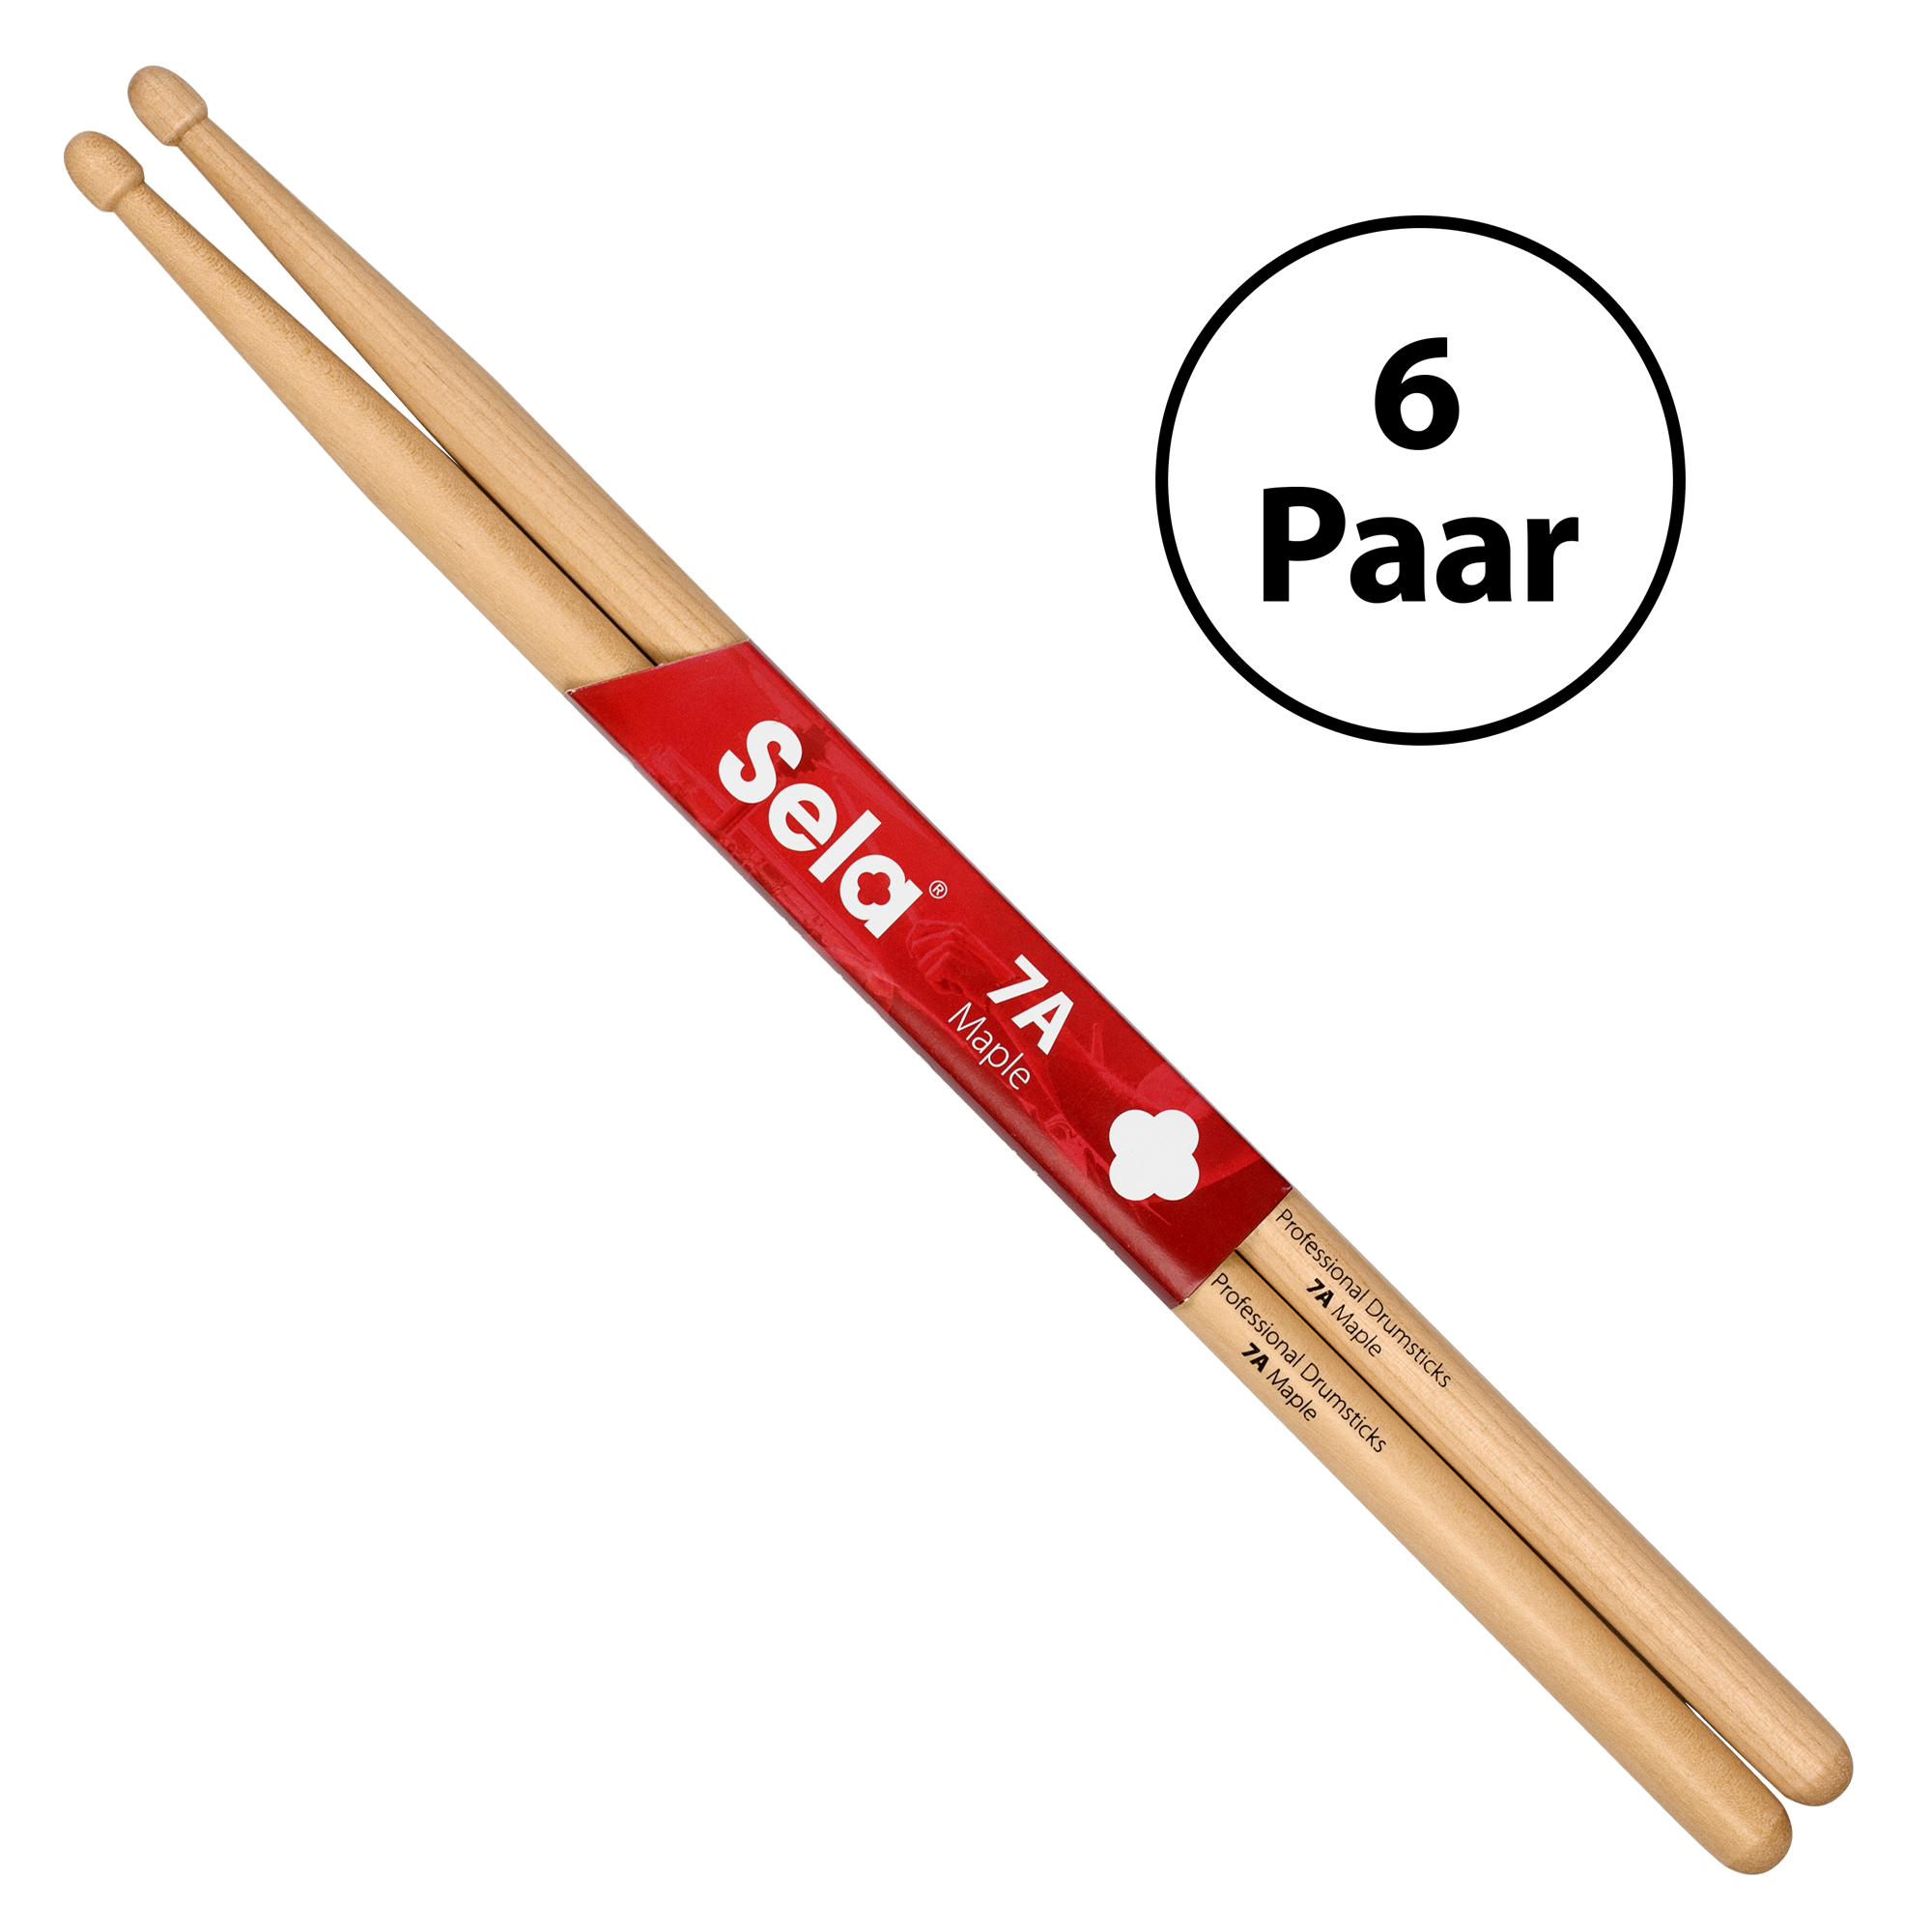 Professional Drumsticks 7A Maple (6 Paar)